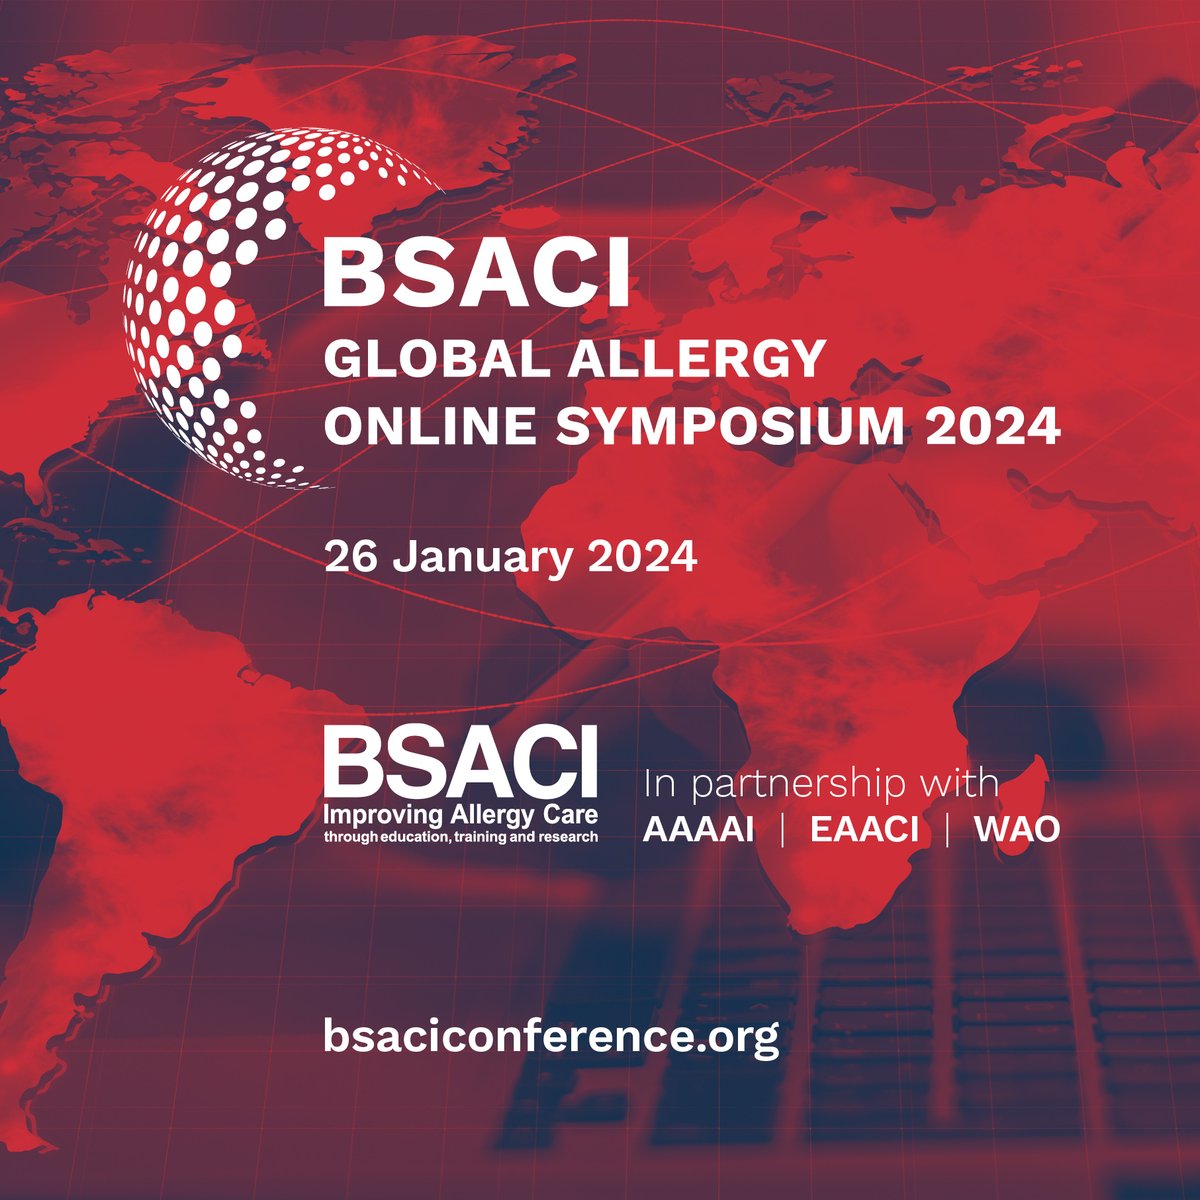 #BSACISOTA24 is happening this Friday 26th January! Earn 6 CPD points when you attend the Global Allergy Online Symposium. Register now at bsaciconference.org. @BSACI_Allergy in partnership with @worldallergy, @AAAAI_org and @EAACI_HQ